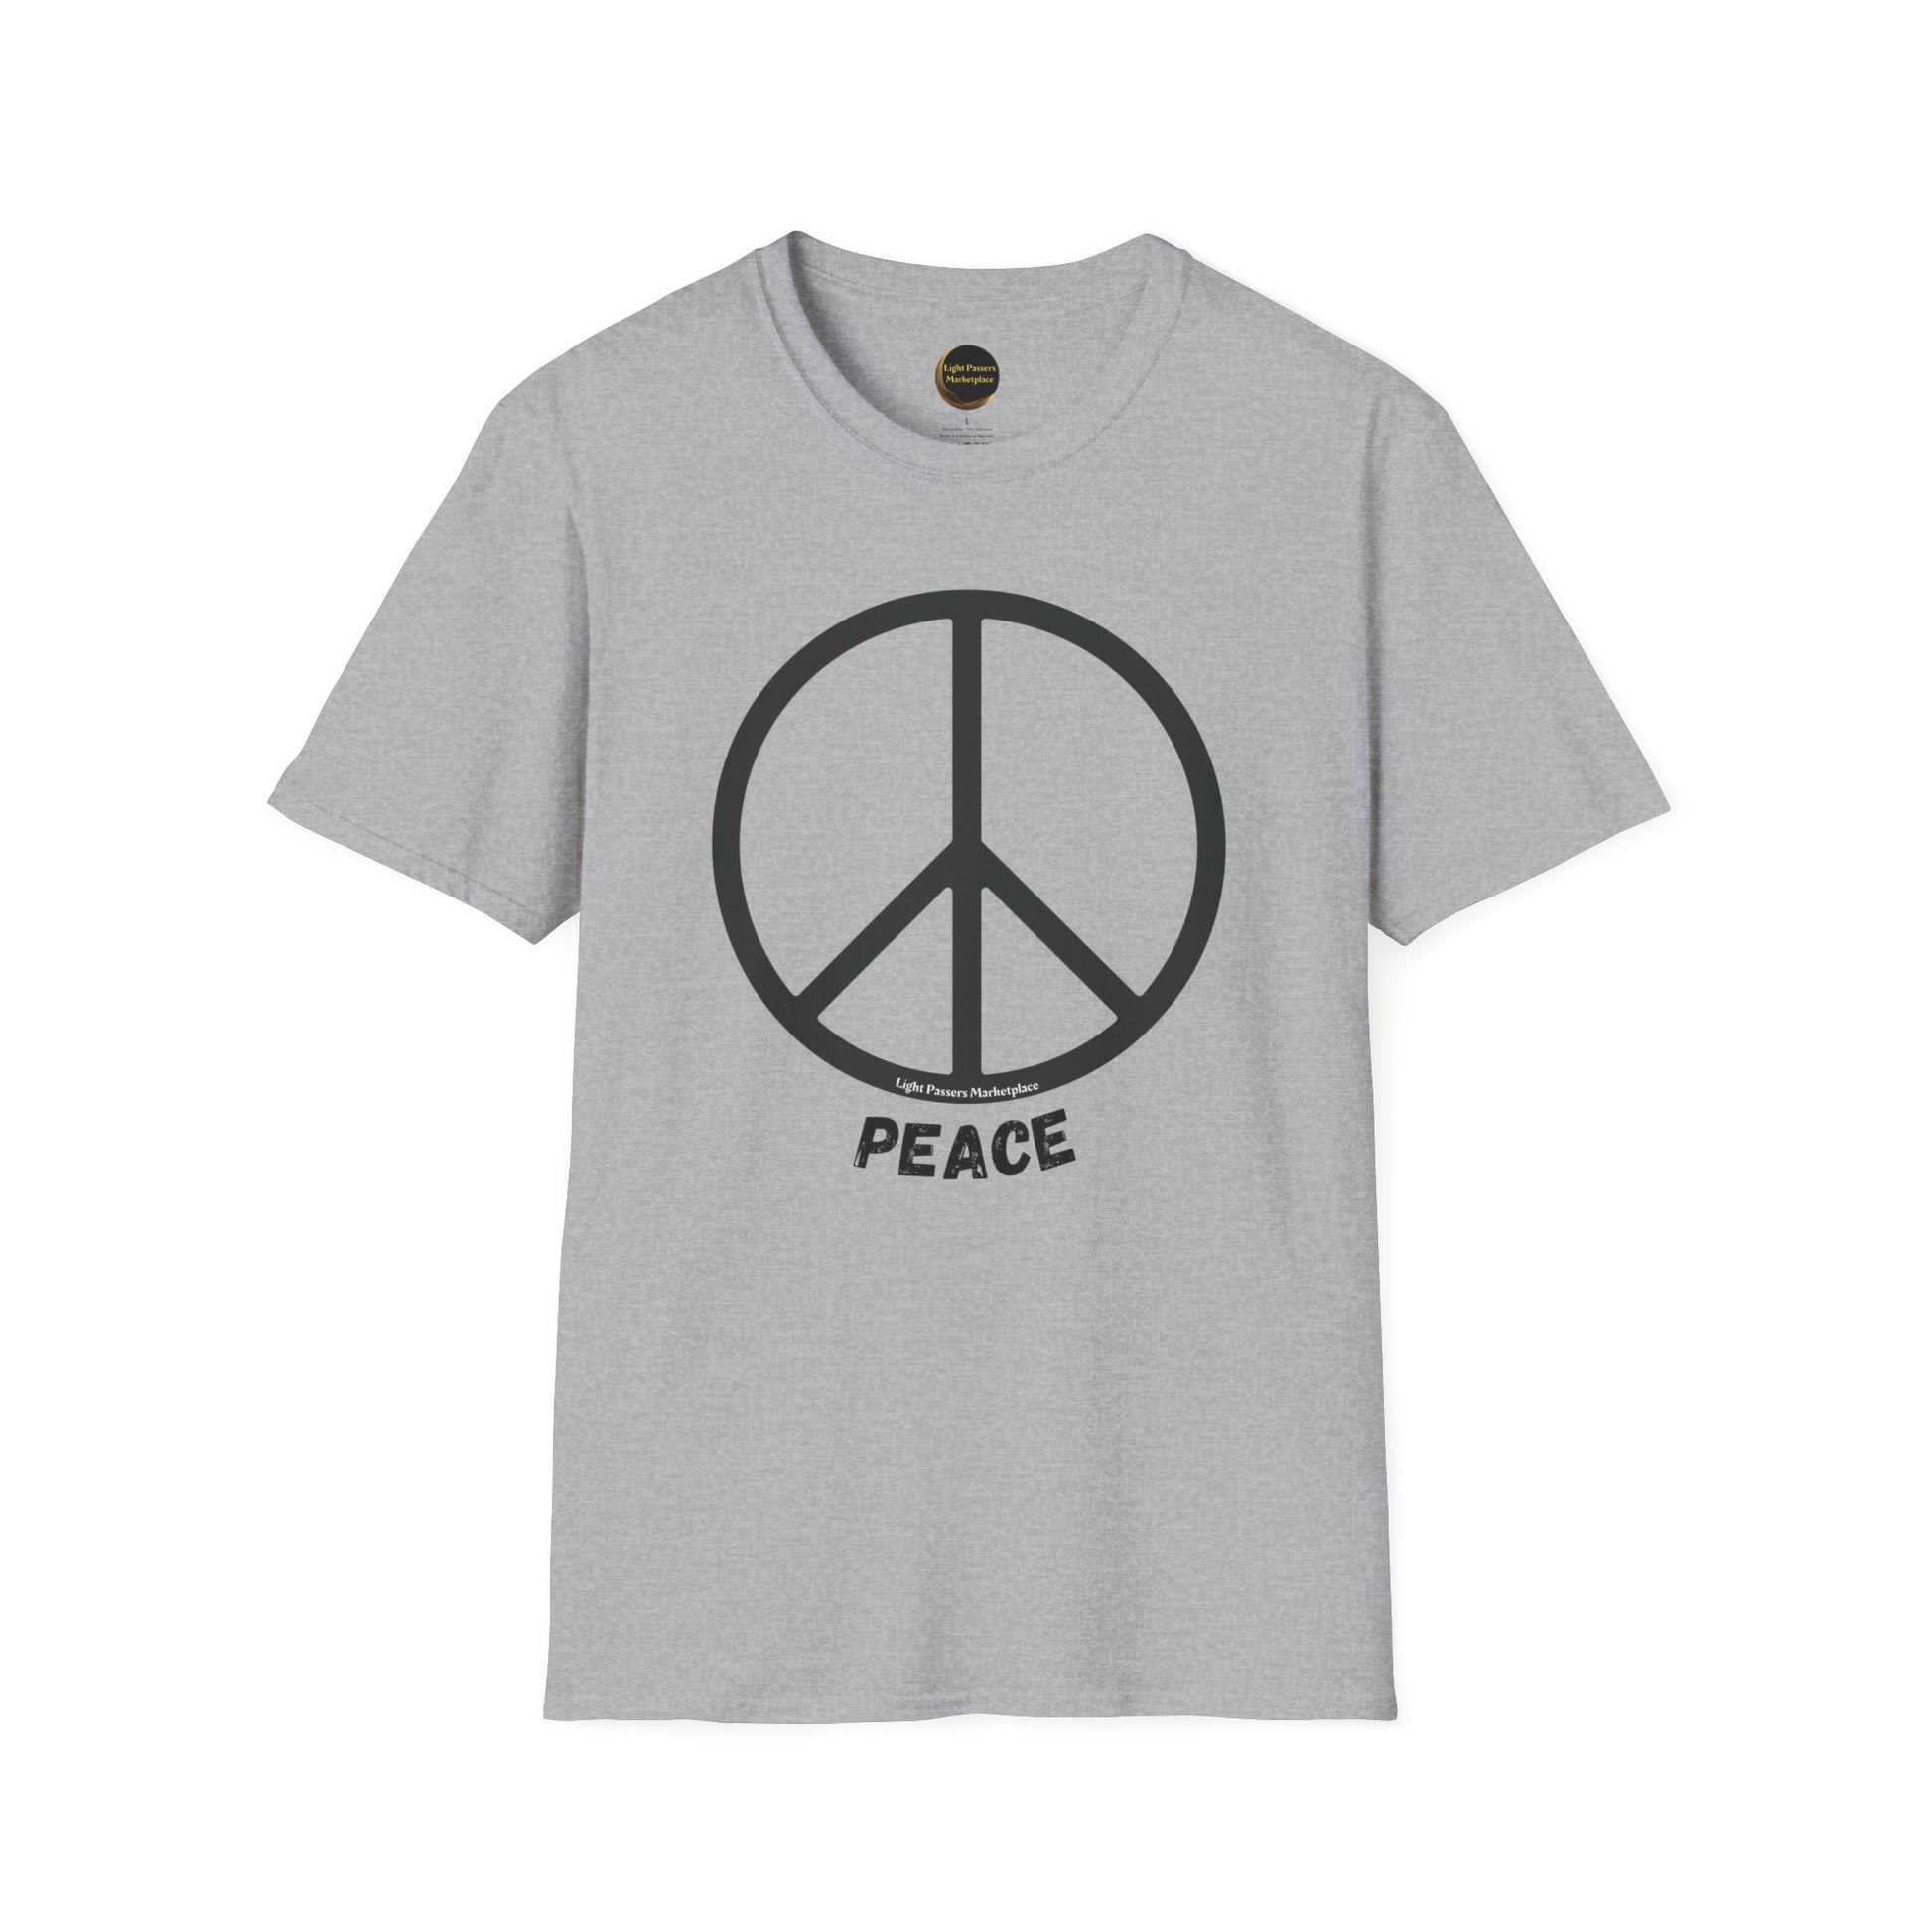 A grey unisex t-shirt featuring a peace symbol in black or white. Made of soft 100% cotton with twill tape shoulders for durability and ribbed collar. Ethically sourced and Oeko-Tex certified.